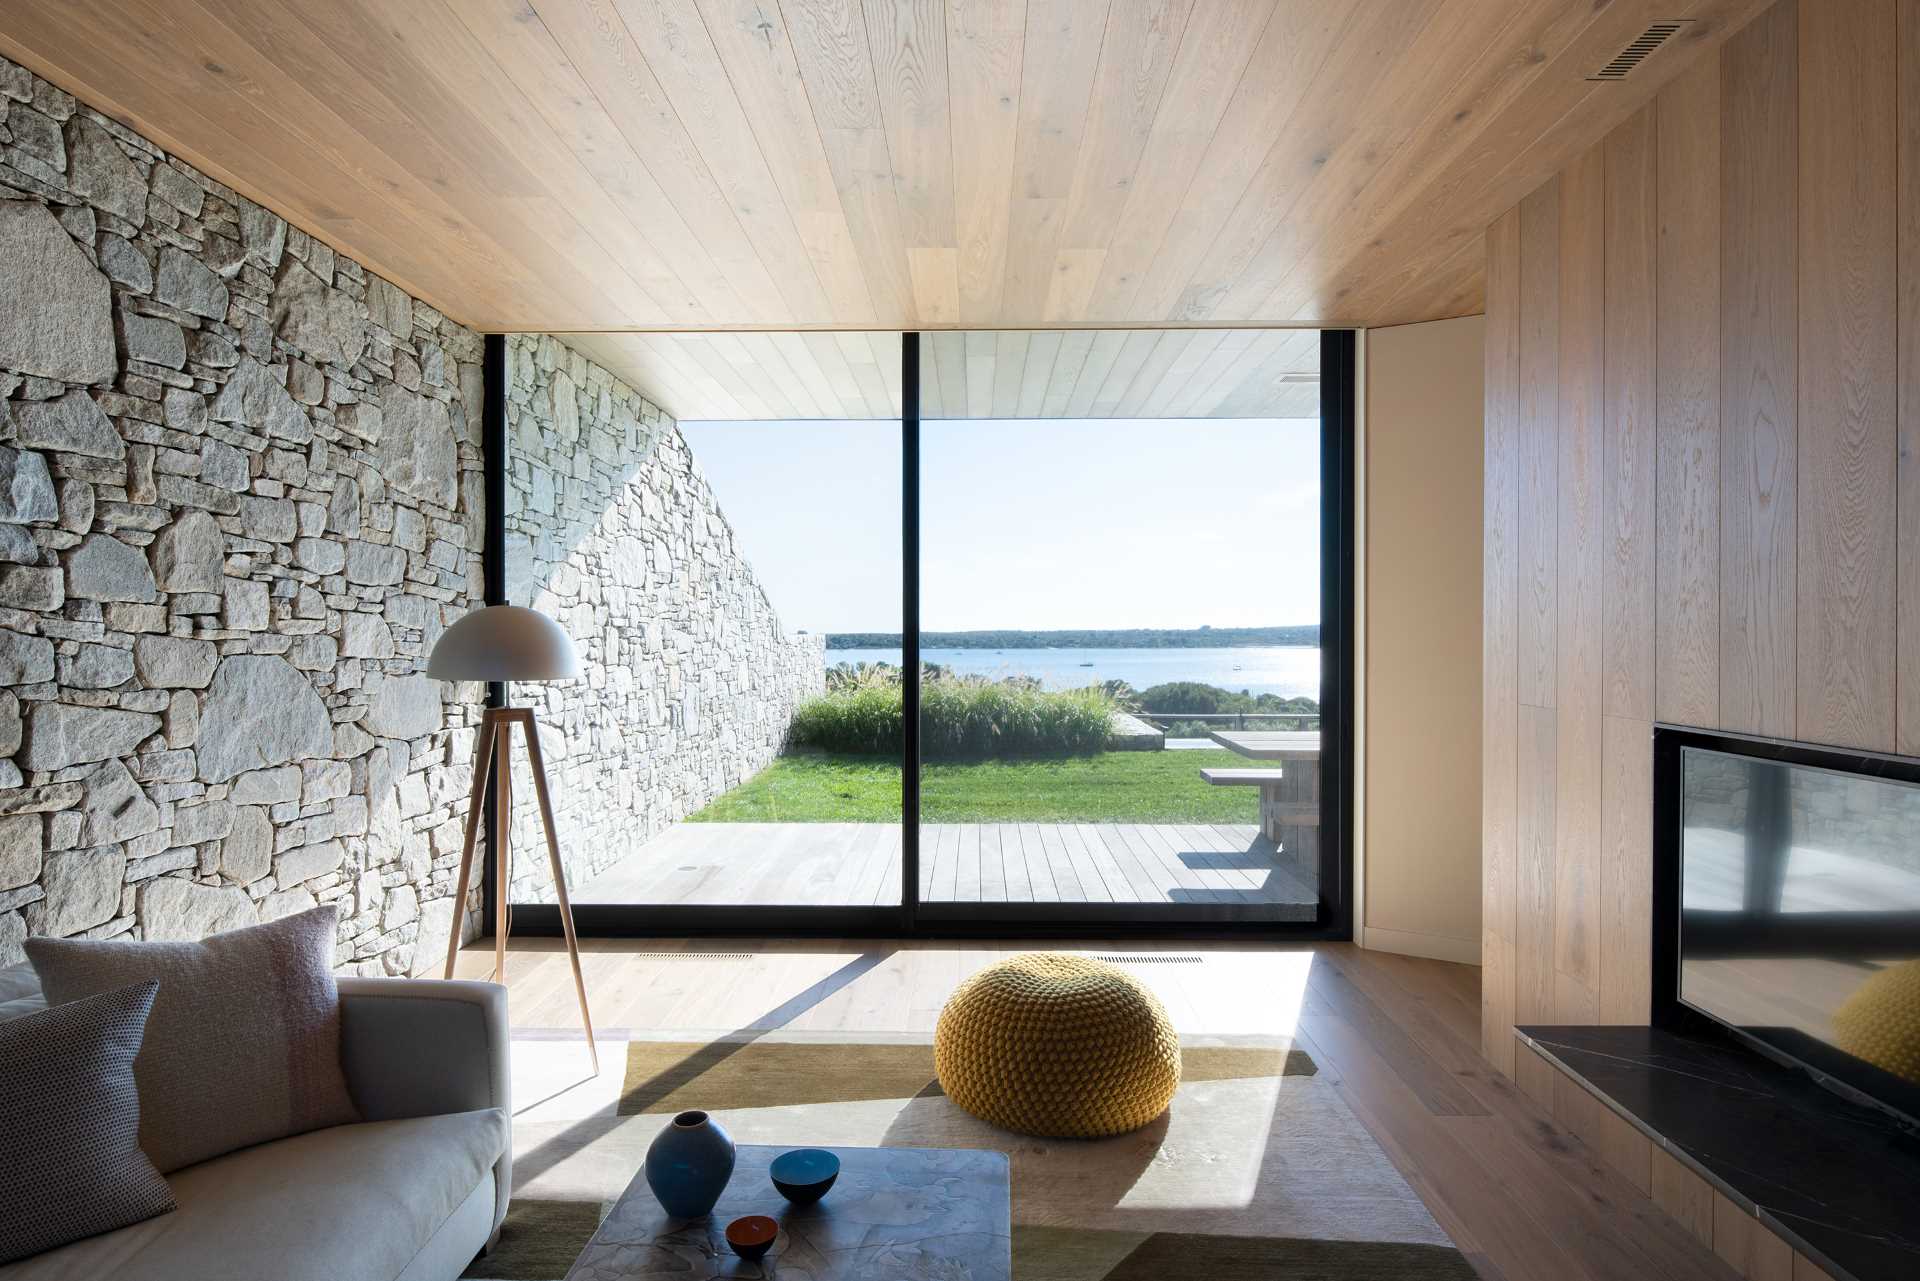 A modern living room with a stone wall that travels from the interior through to the exterior.